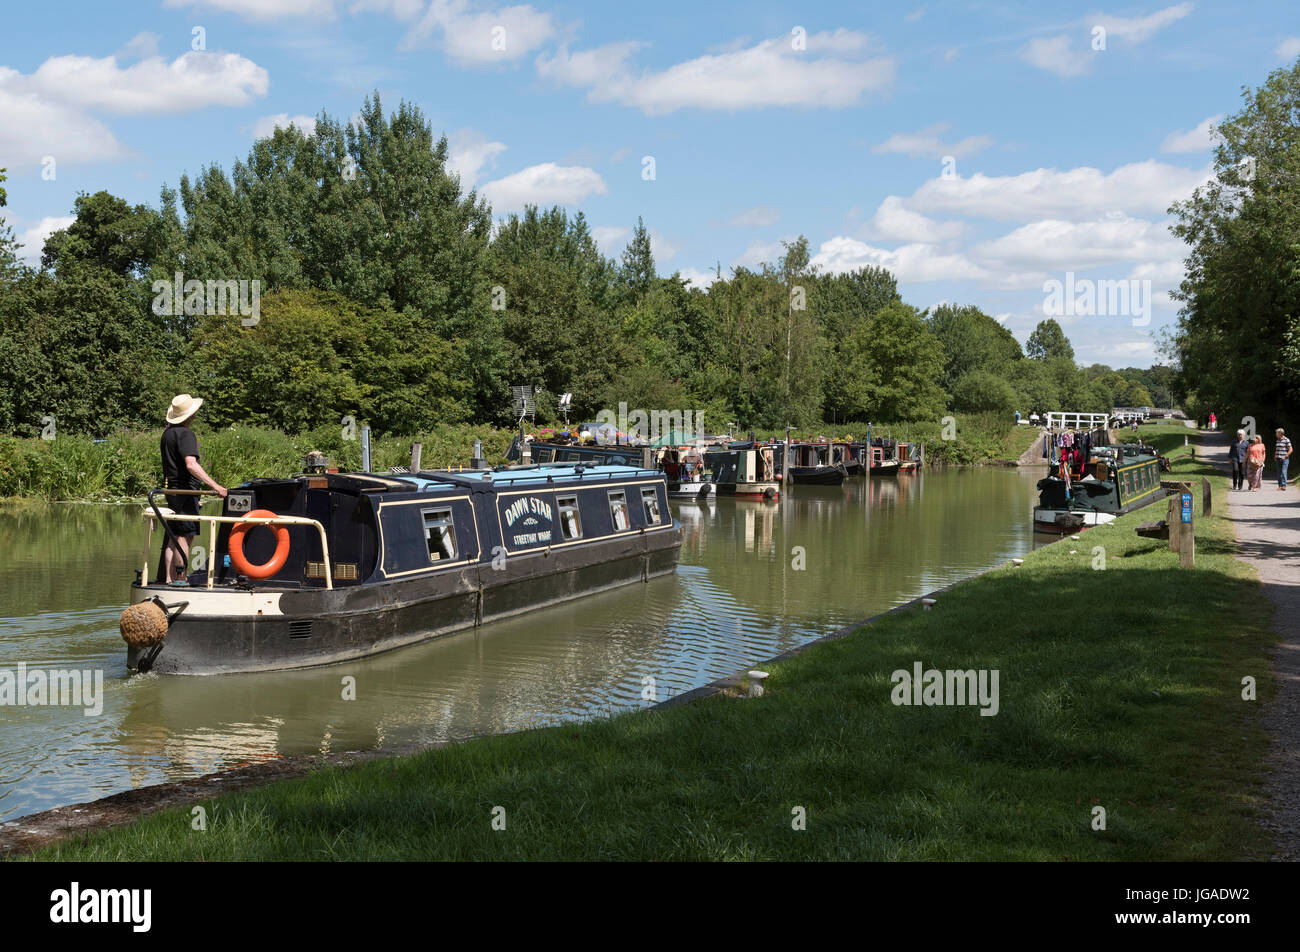 Holiday rental canalboat on the Kennet & Avon Canal close to Devizes in Wiltshire England UK. Stock Photo